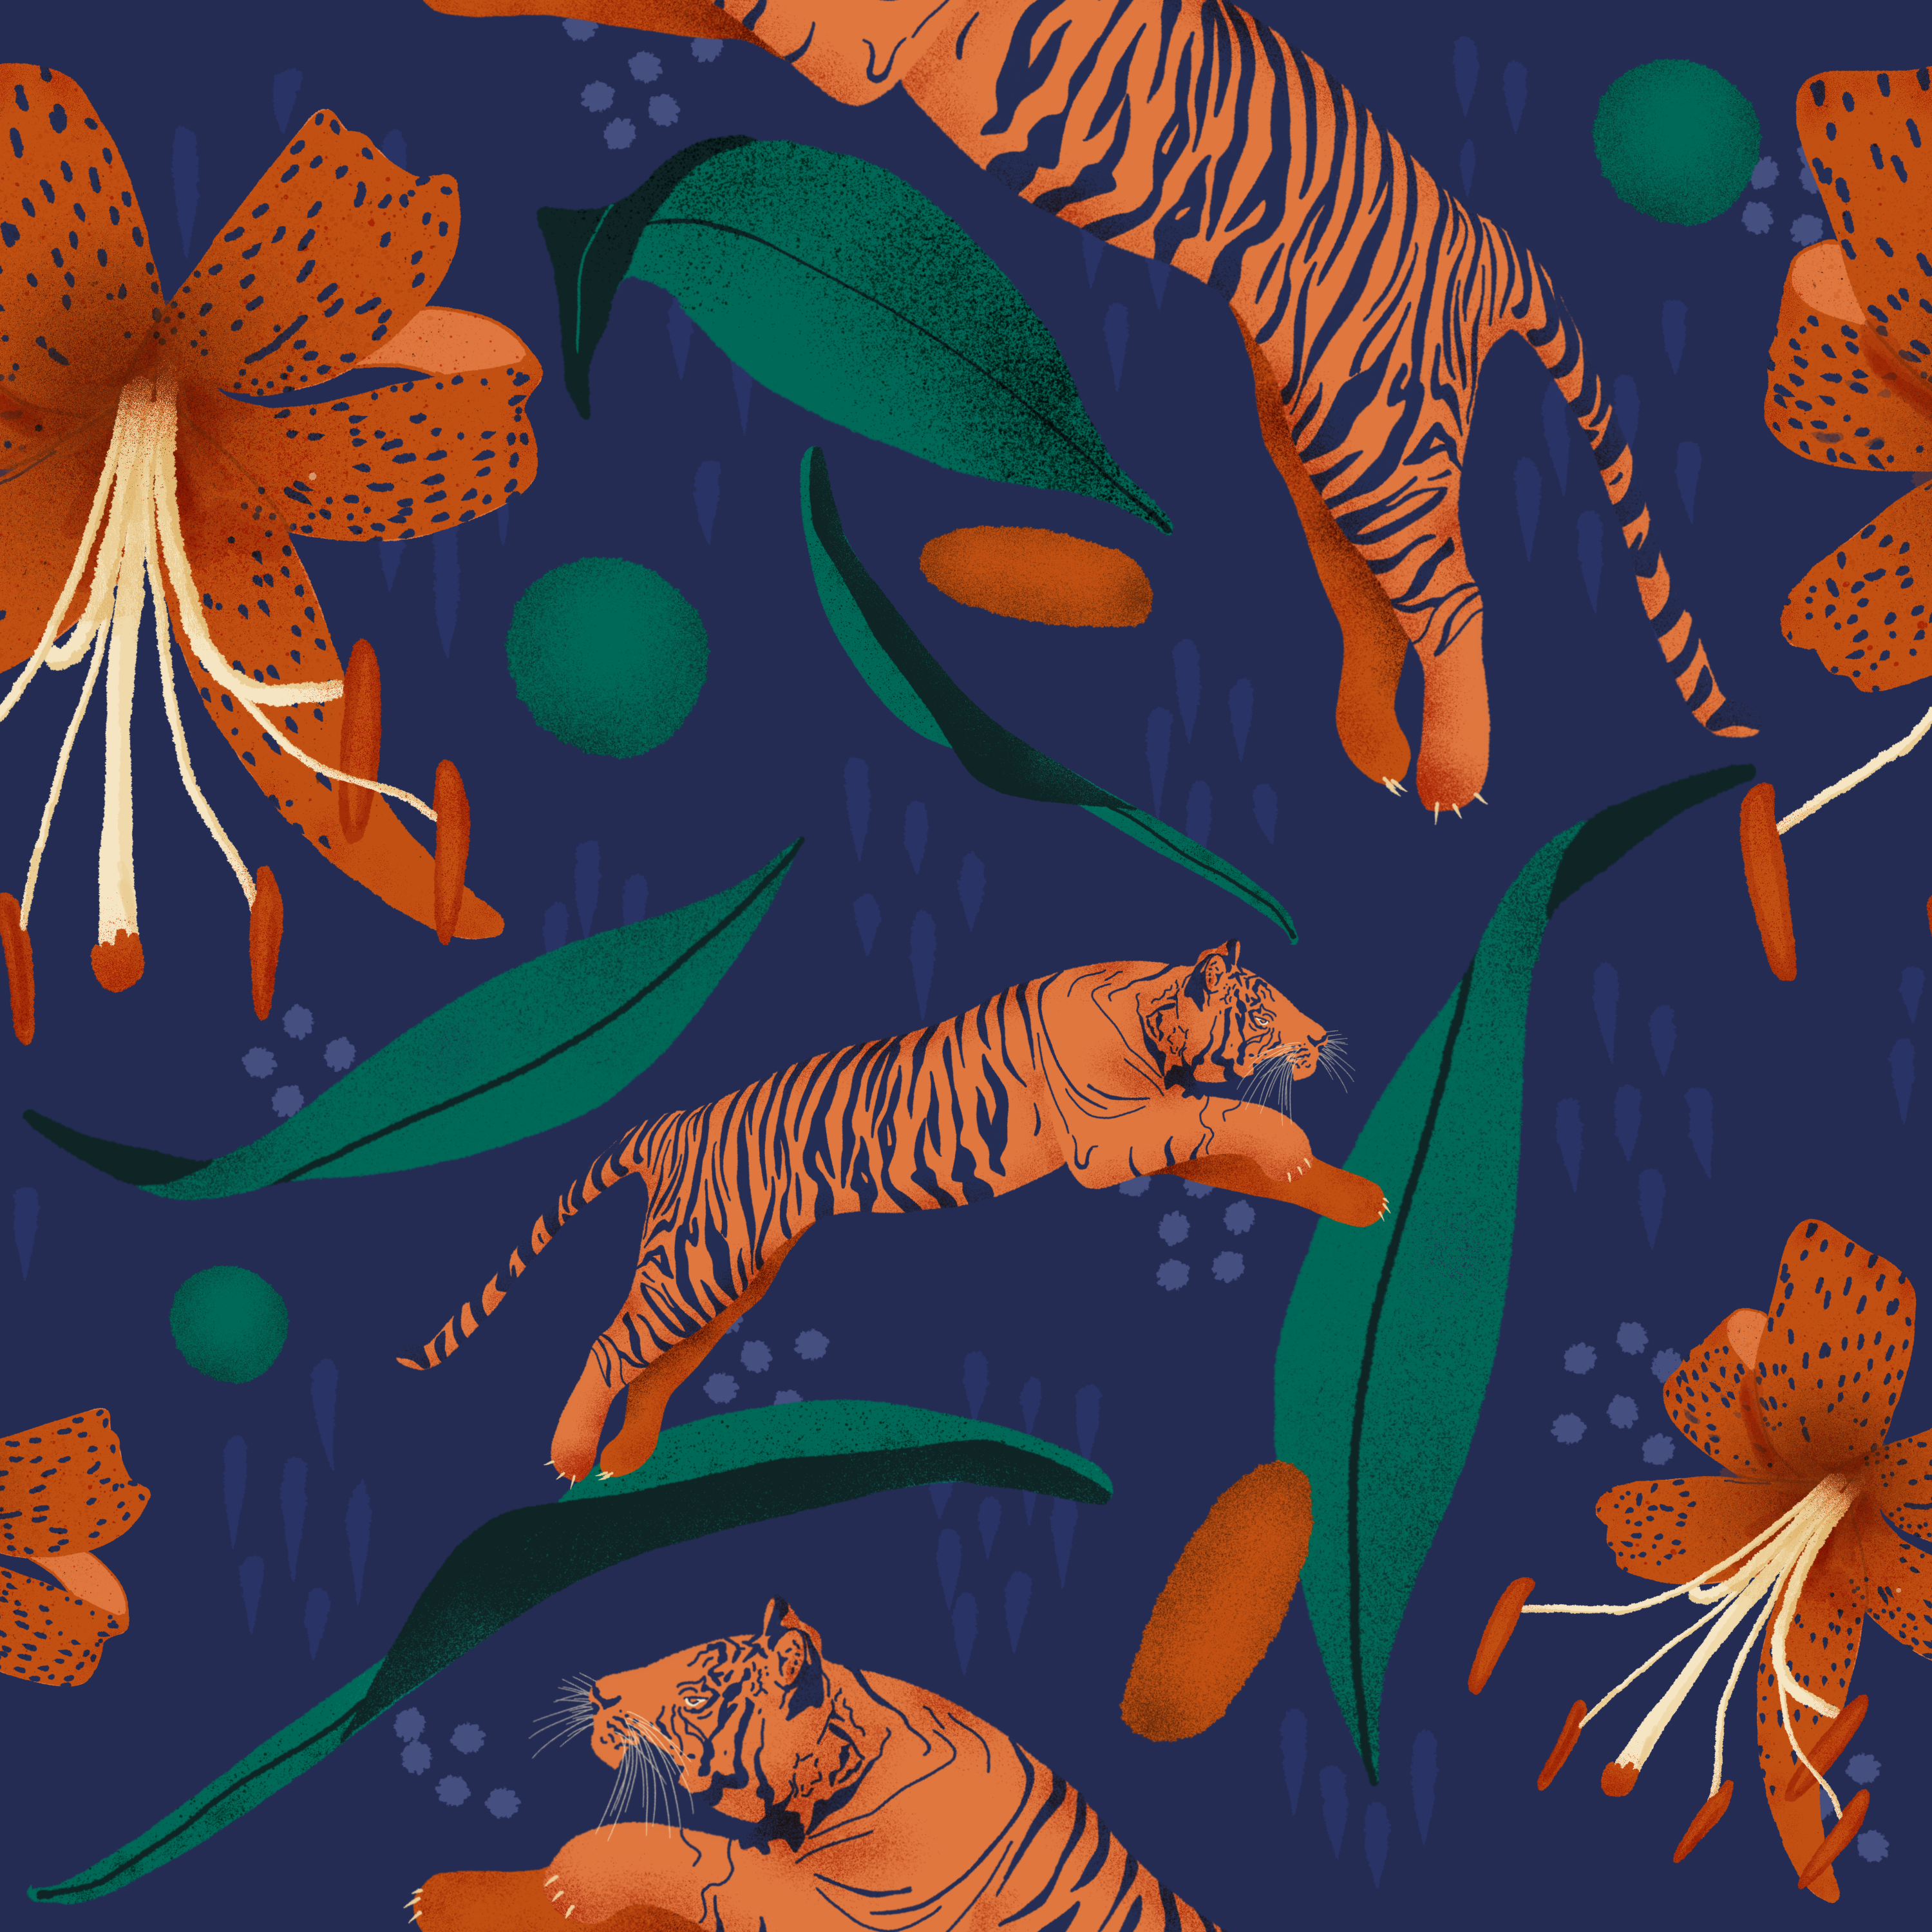 digital pattern created in procreate that features both tigers and tiger lilies